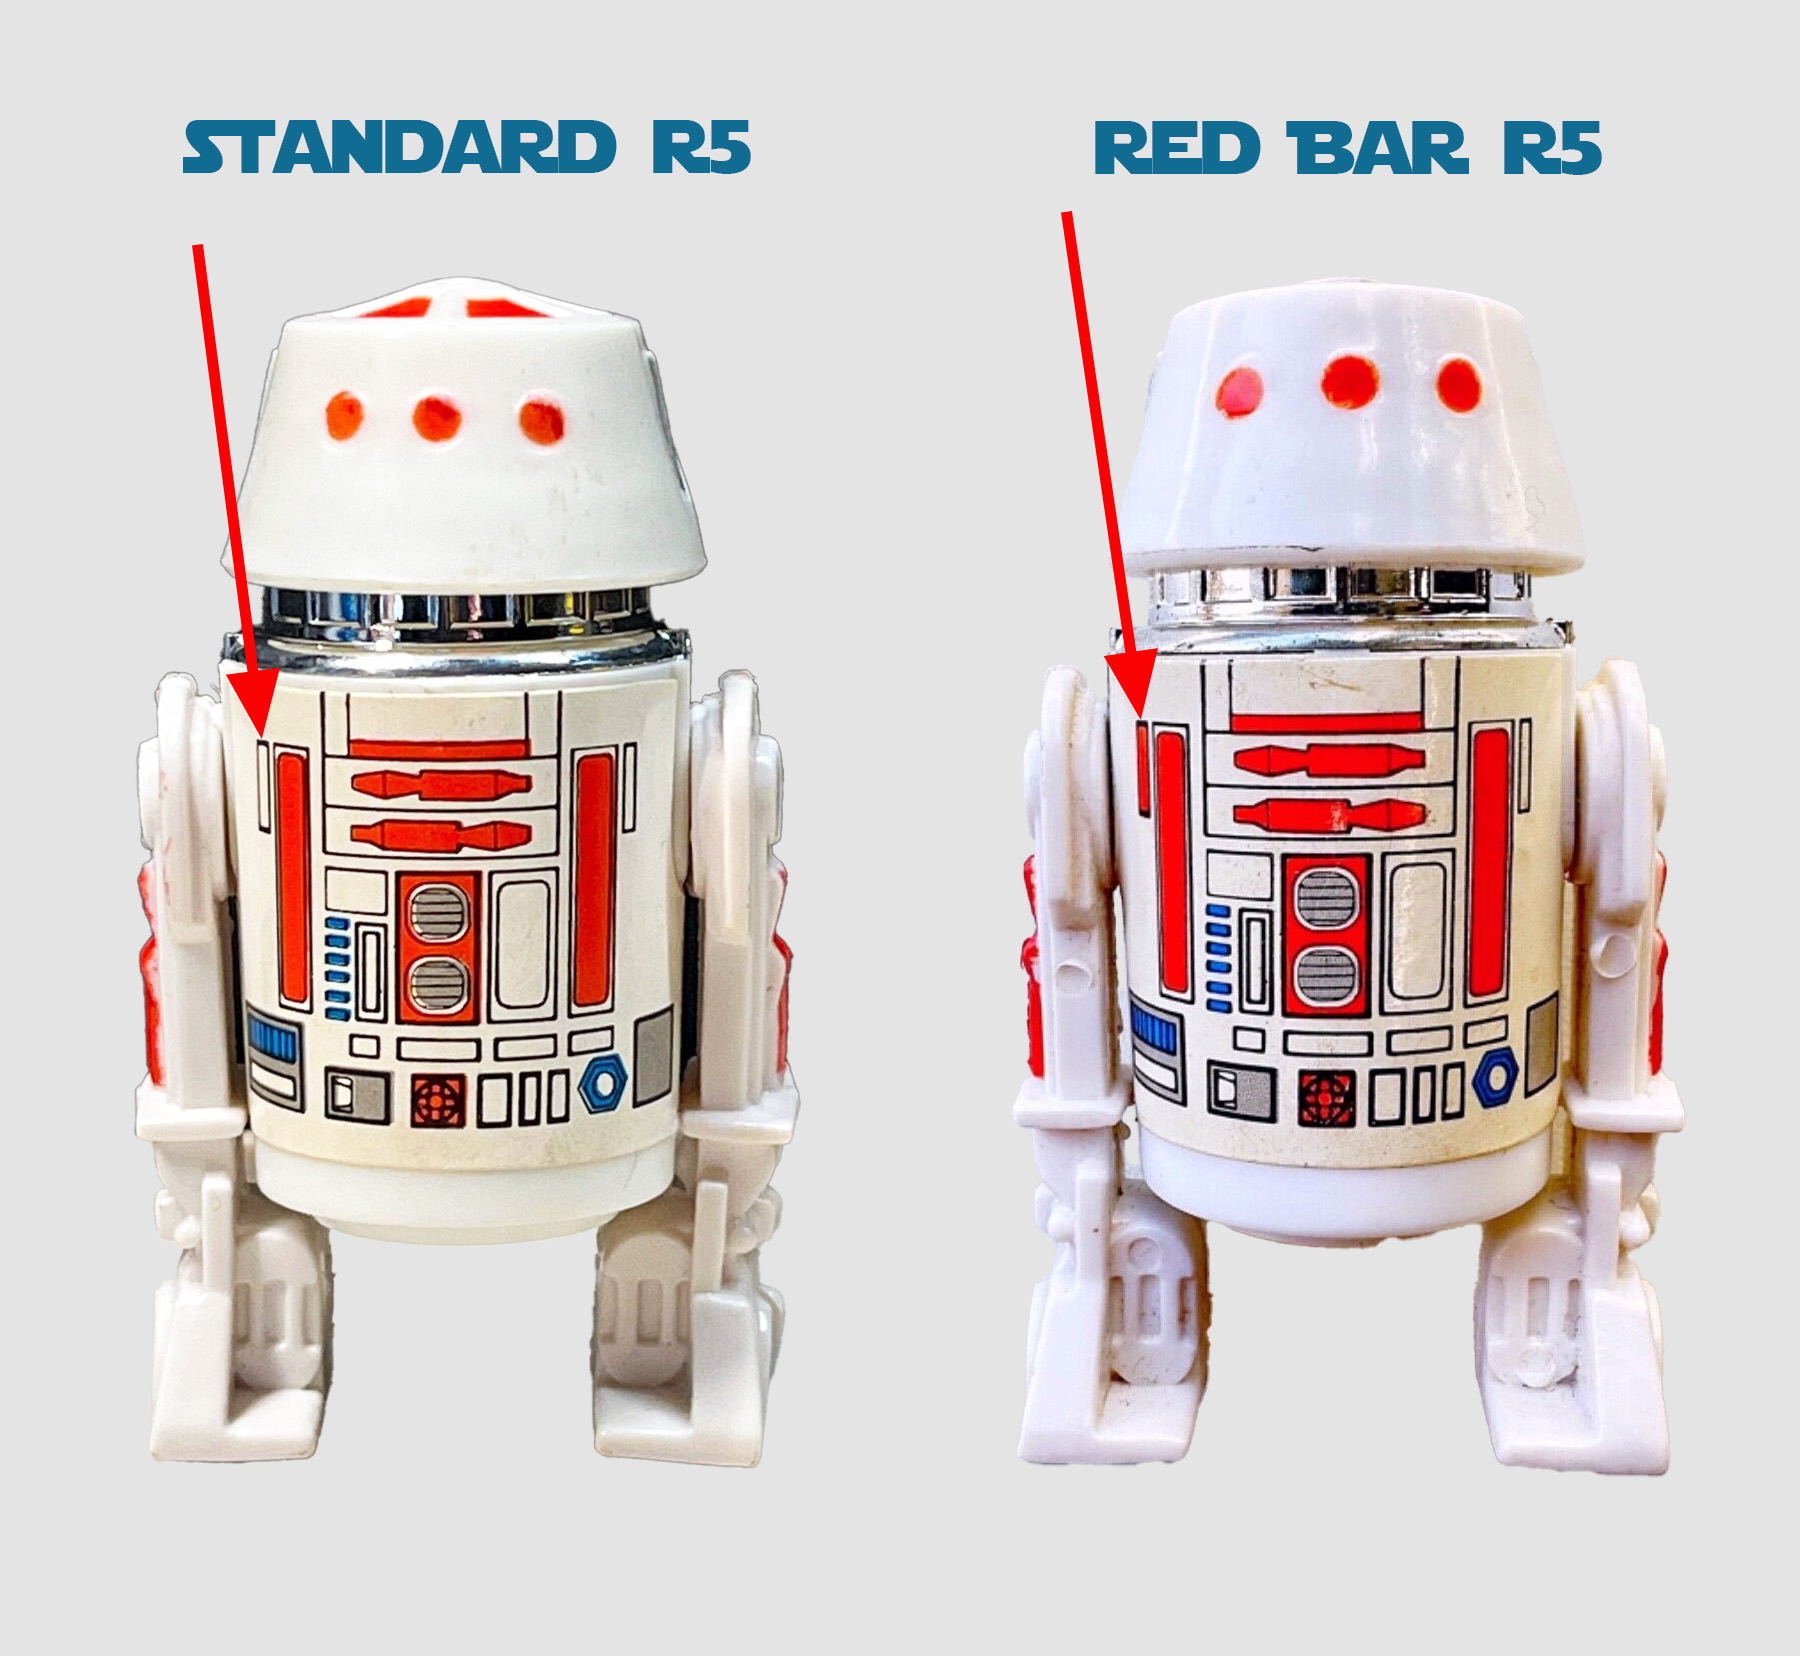 The difference between Red Bar R5-D4 and standard R5 is a colored in box and a few hundred dollars.